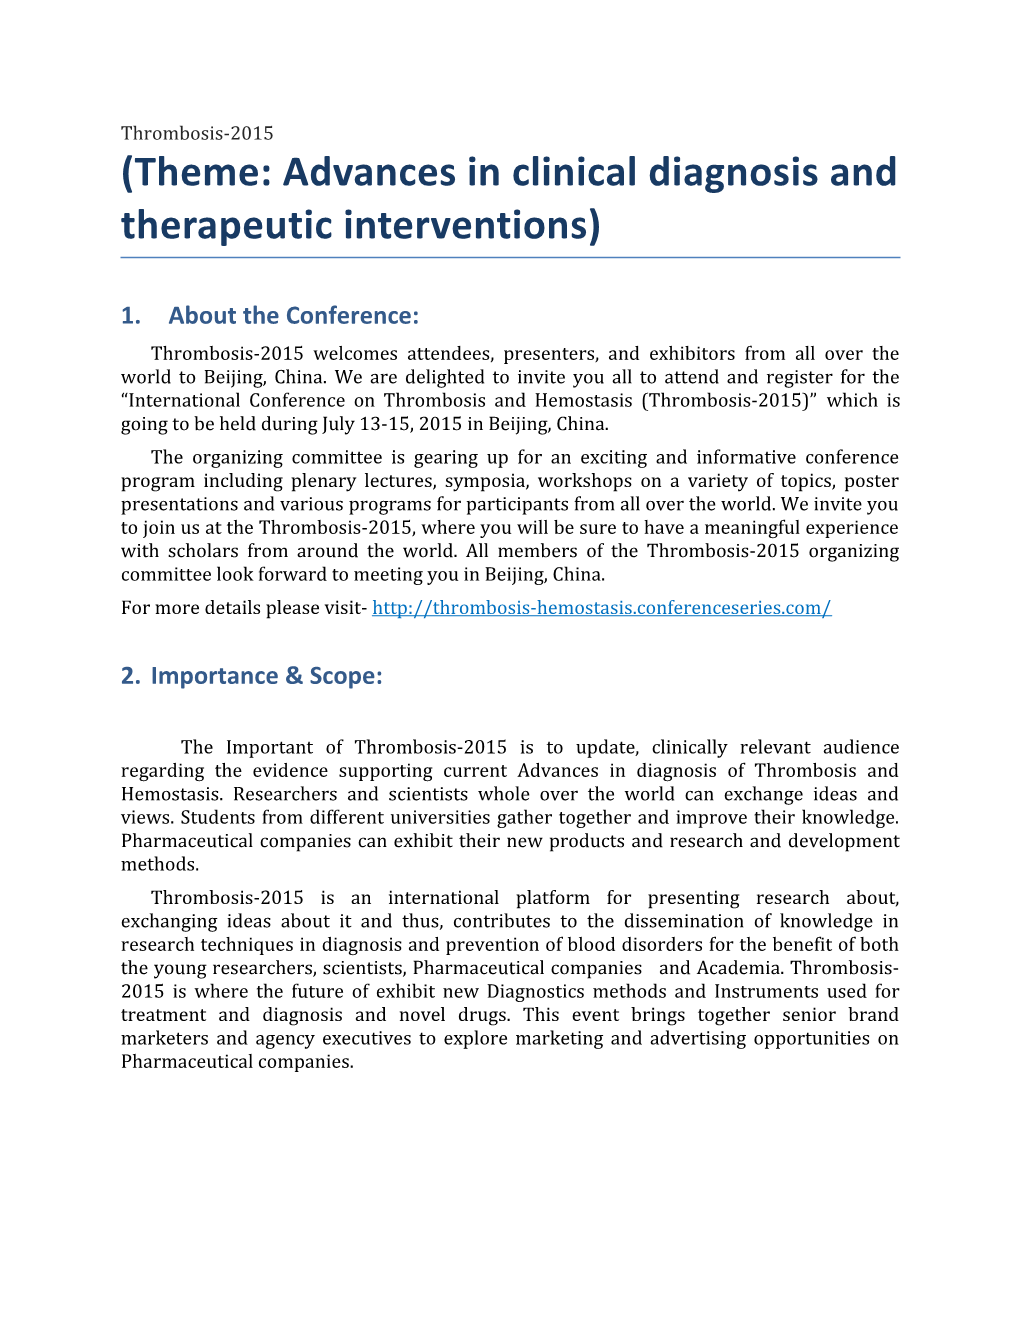 Theme: Advances in Clinical Diagnosis and Therapeutic Interventions